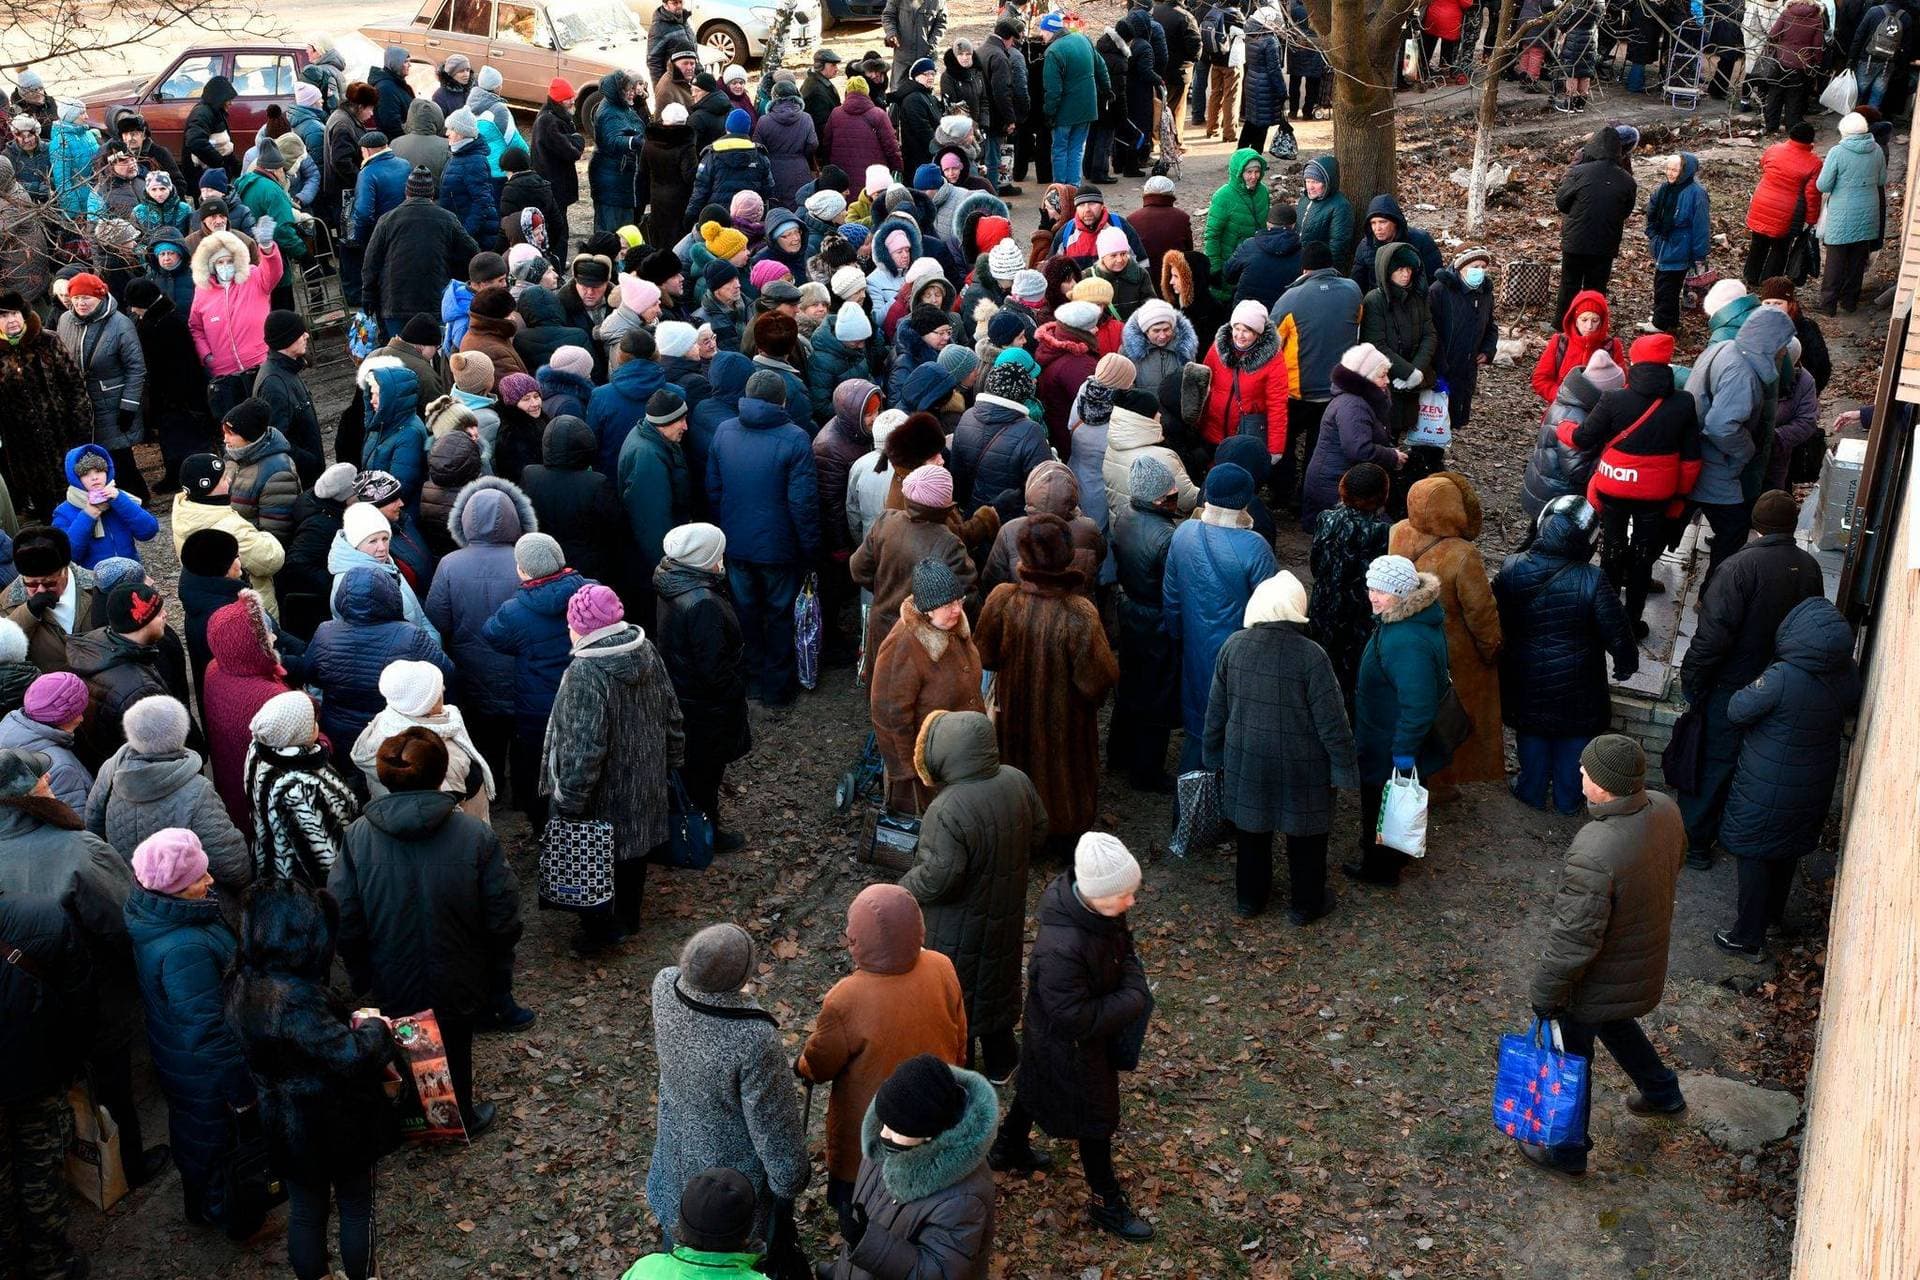 People wait to receive food at a humanitarian aid distribution spot in Kramatorsk